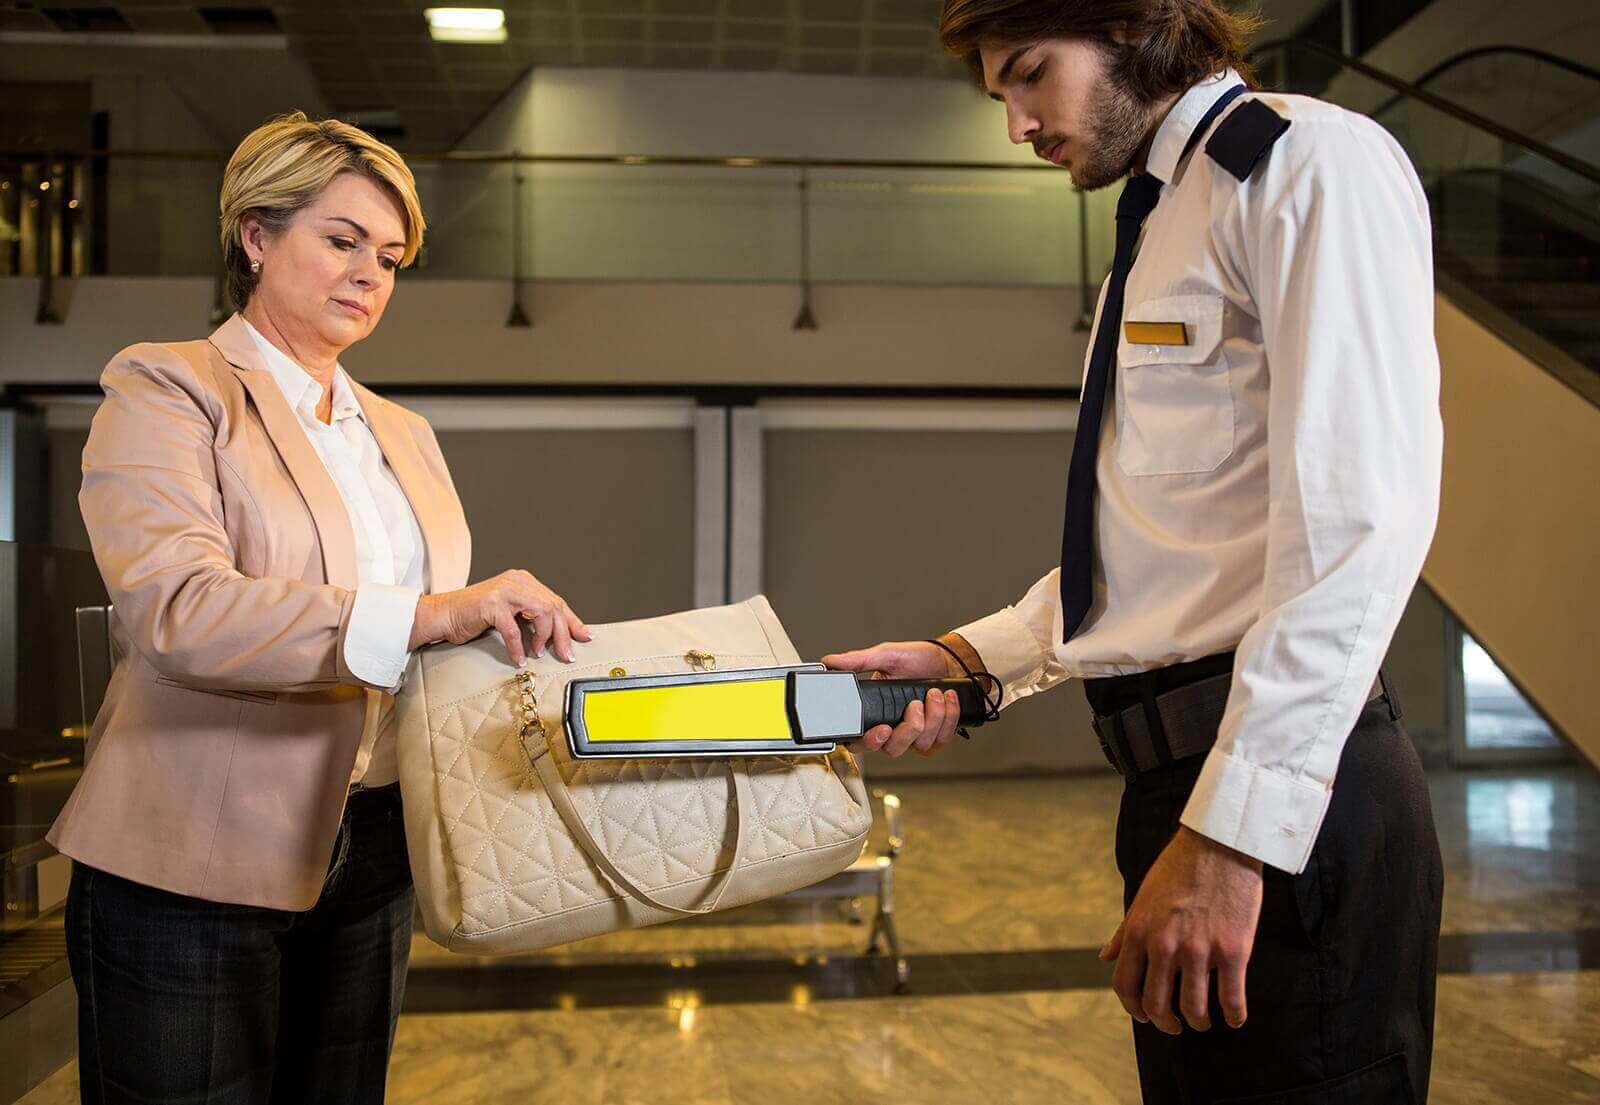 The Role of Safety and Security Training for Travelers and Tourists